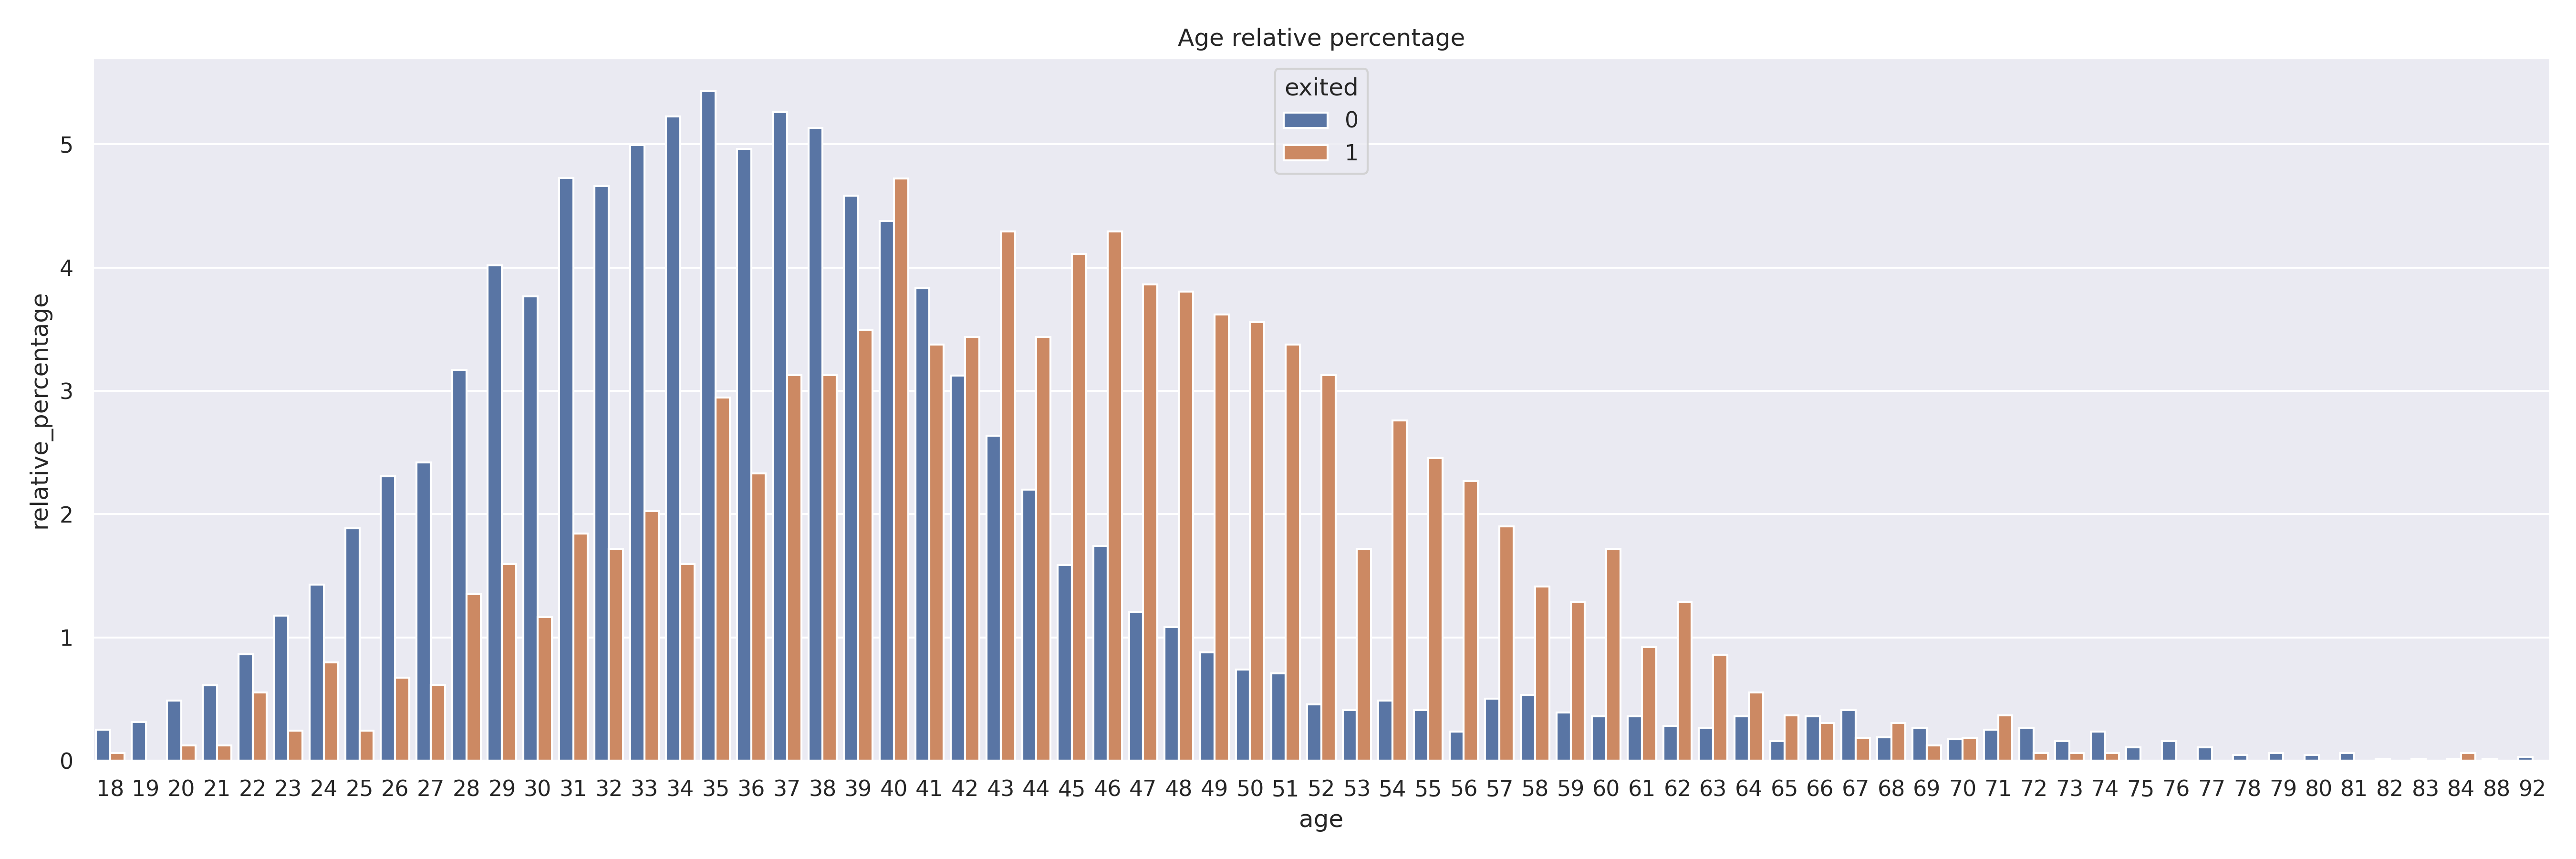 04_age_relative_percentage.png